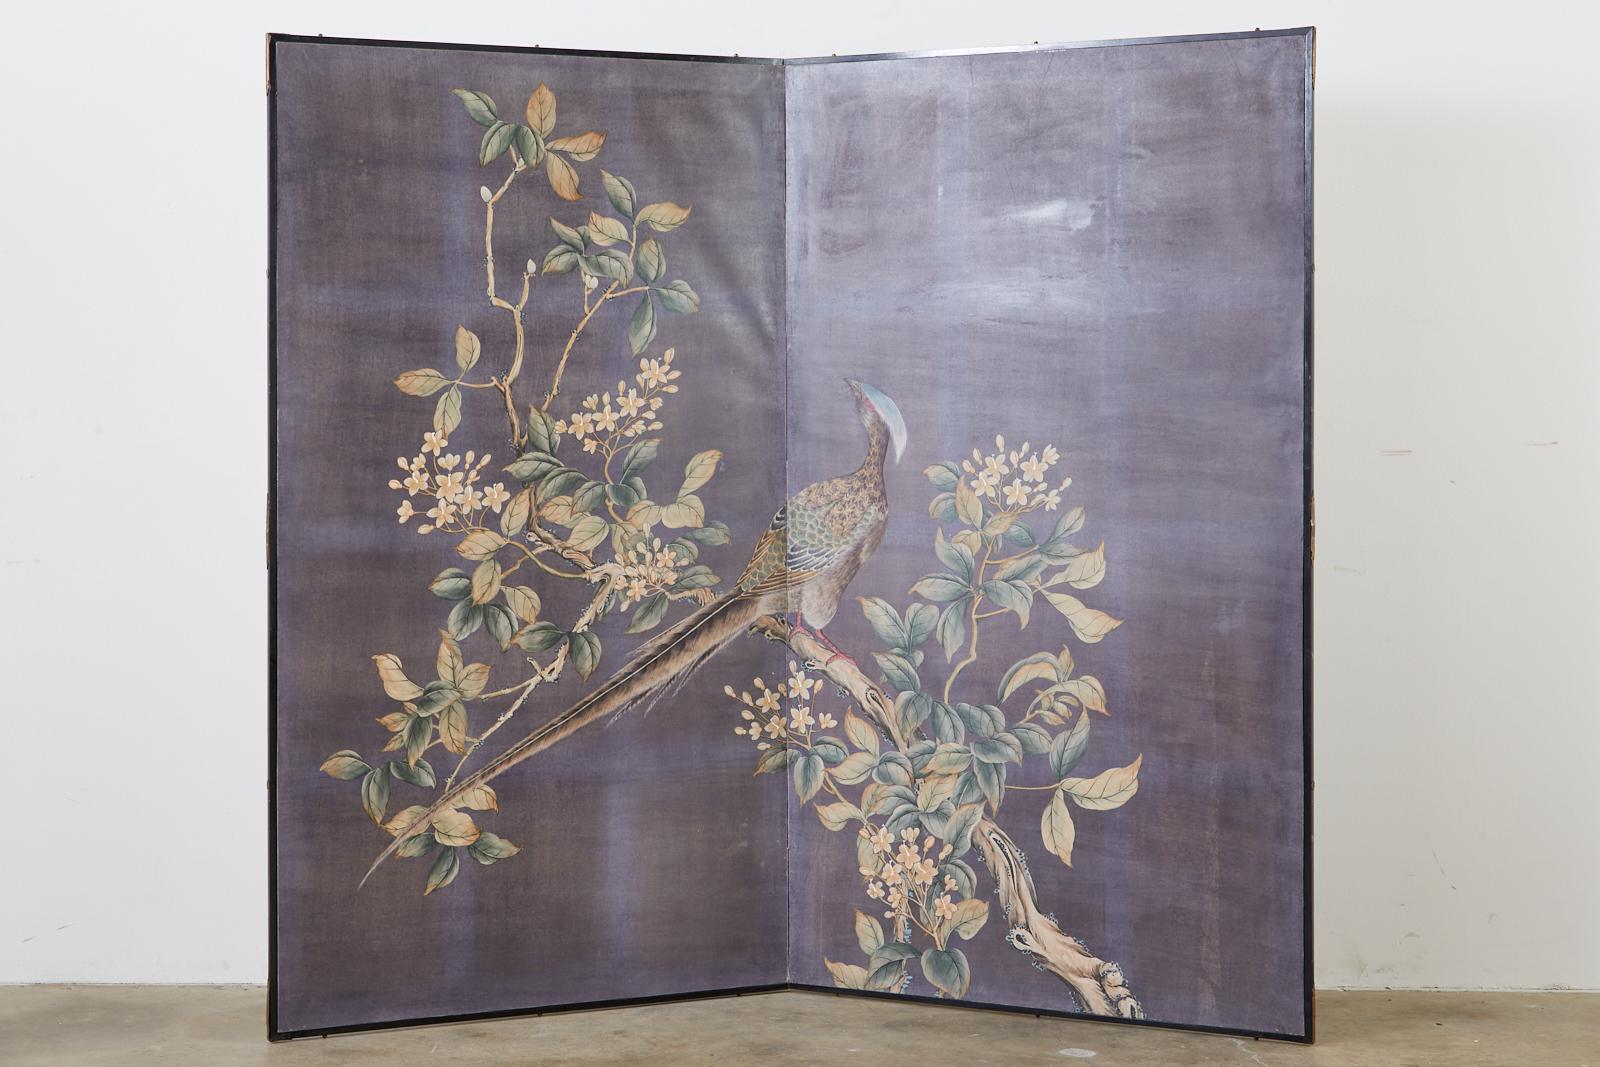 Dramatic Chinese export two-panel screen featuring hand painted wallpaper panels in the style and manner of Gracie chinoiserie paintings. The scene depicts a large pheasant perched in a blossoming dogwood tree with flowers. Ink and natural color